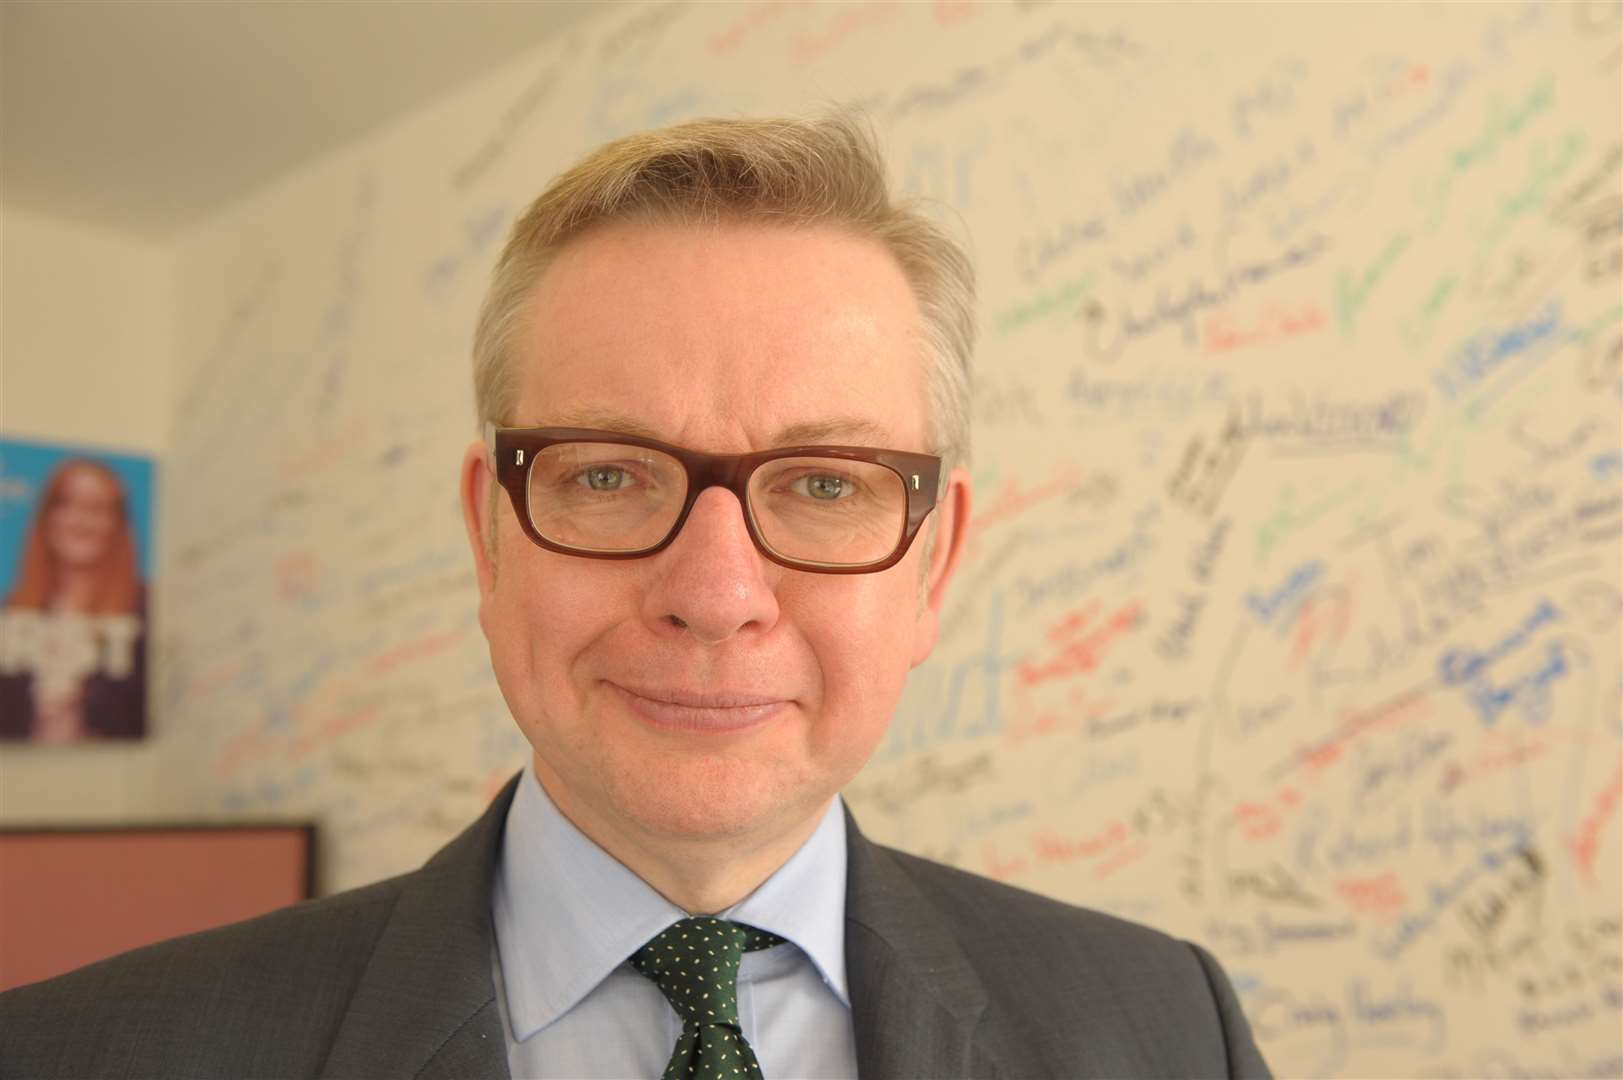 Michael Gove has made the statement today. Picture: Steve Crispe